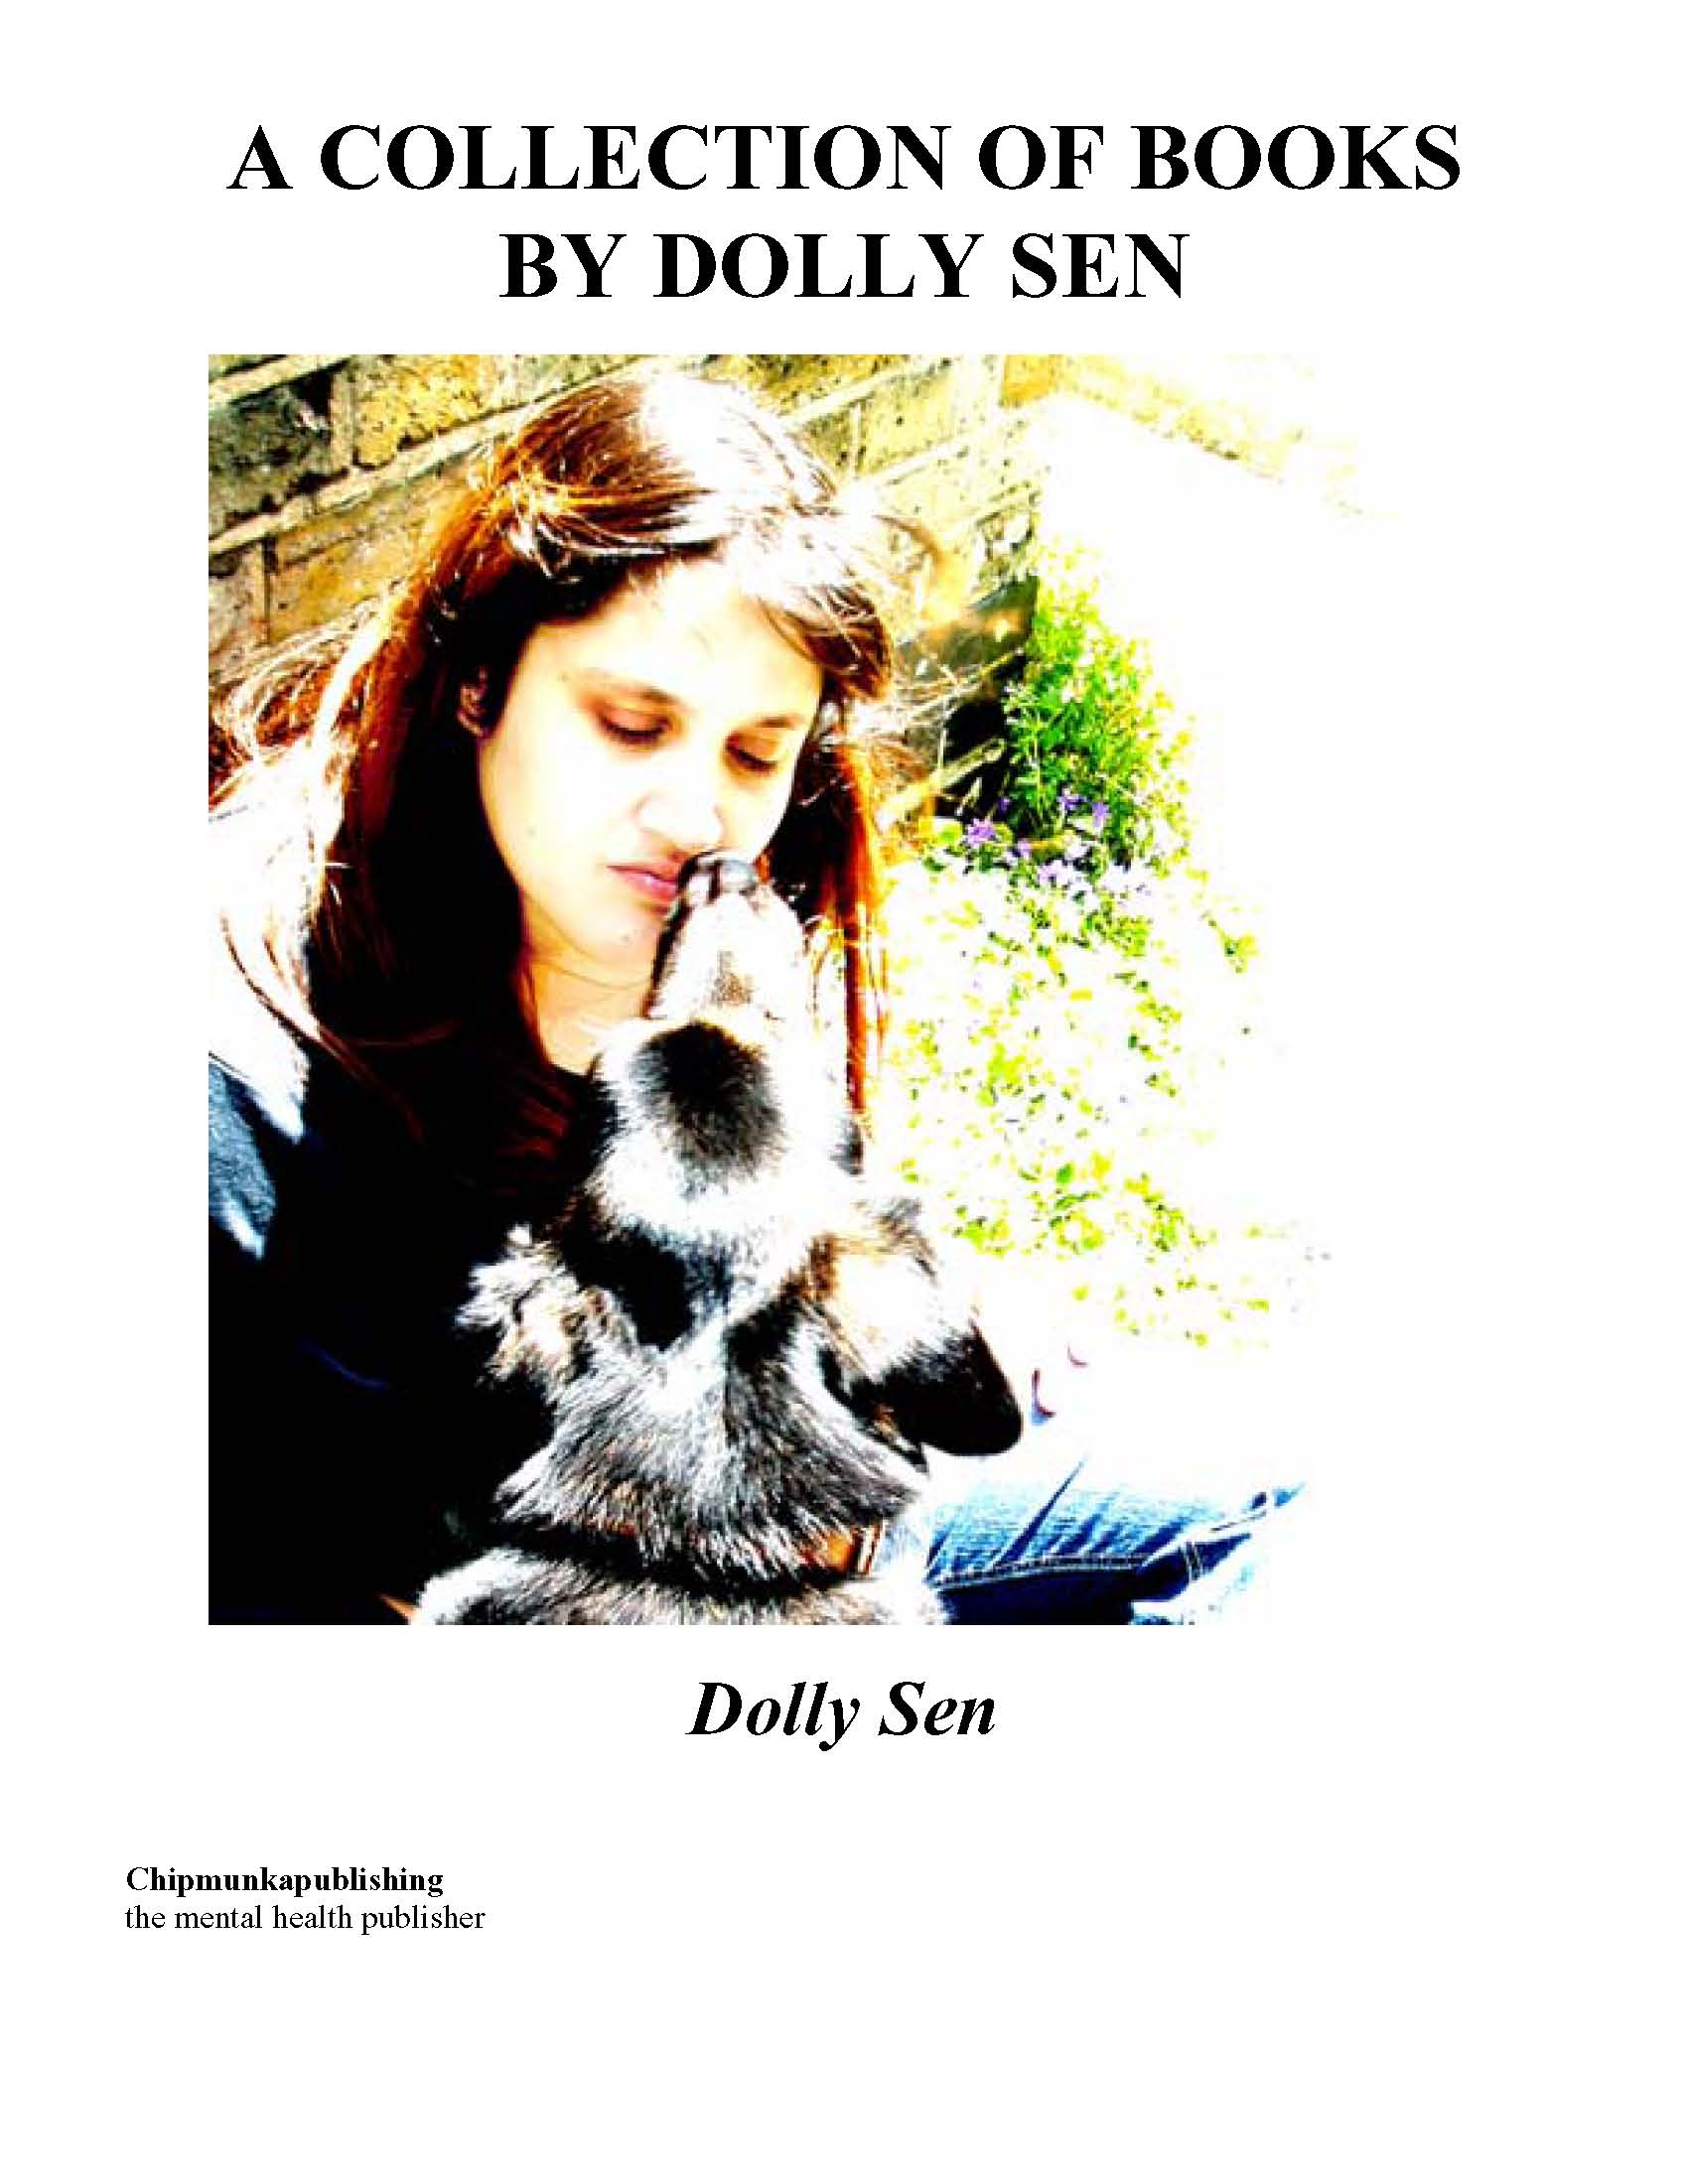 A Collection of Books by Dolly Sen